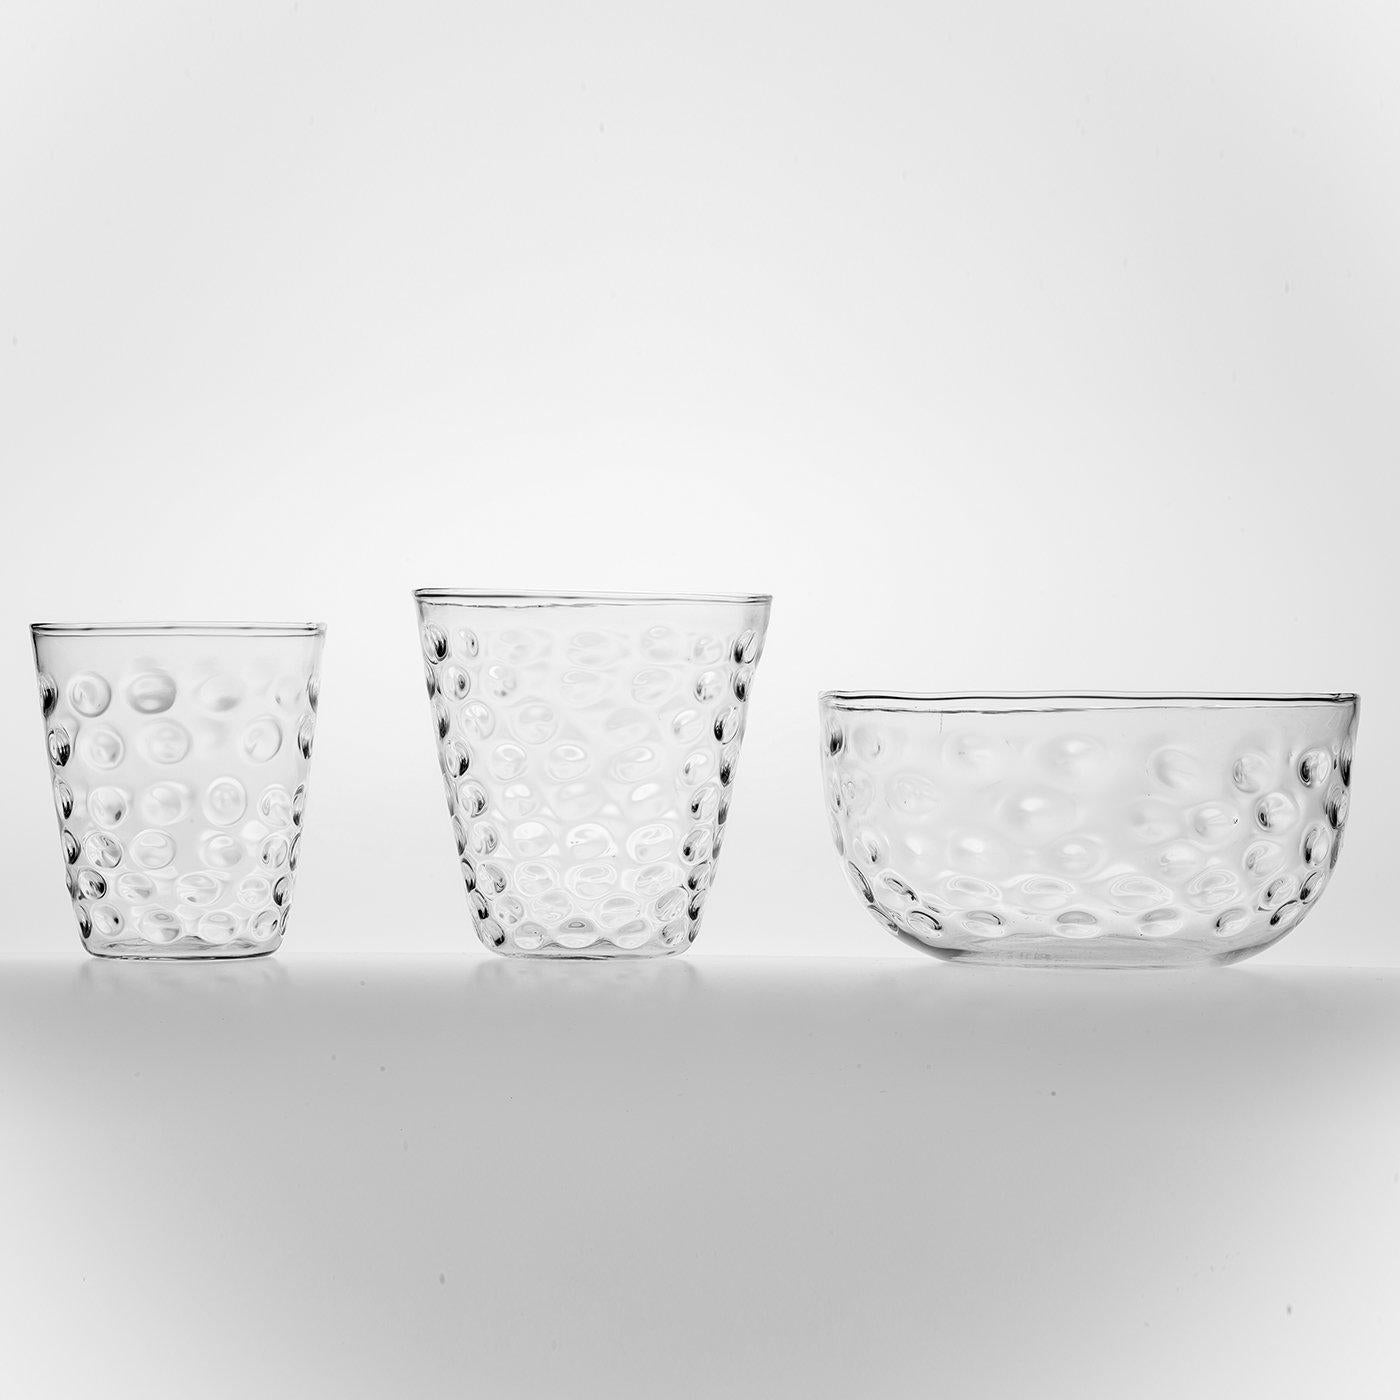 Set of 6 water or wine glasses with an inimitable quality in a slightly larger version. Handcrafted in Venice, the form of the glasses is finished with a deft bubble effect that creates an elegant interplay of light.